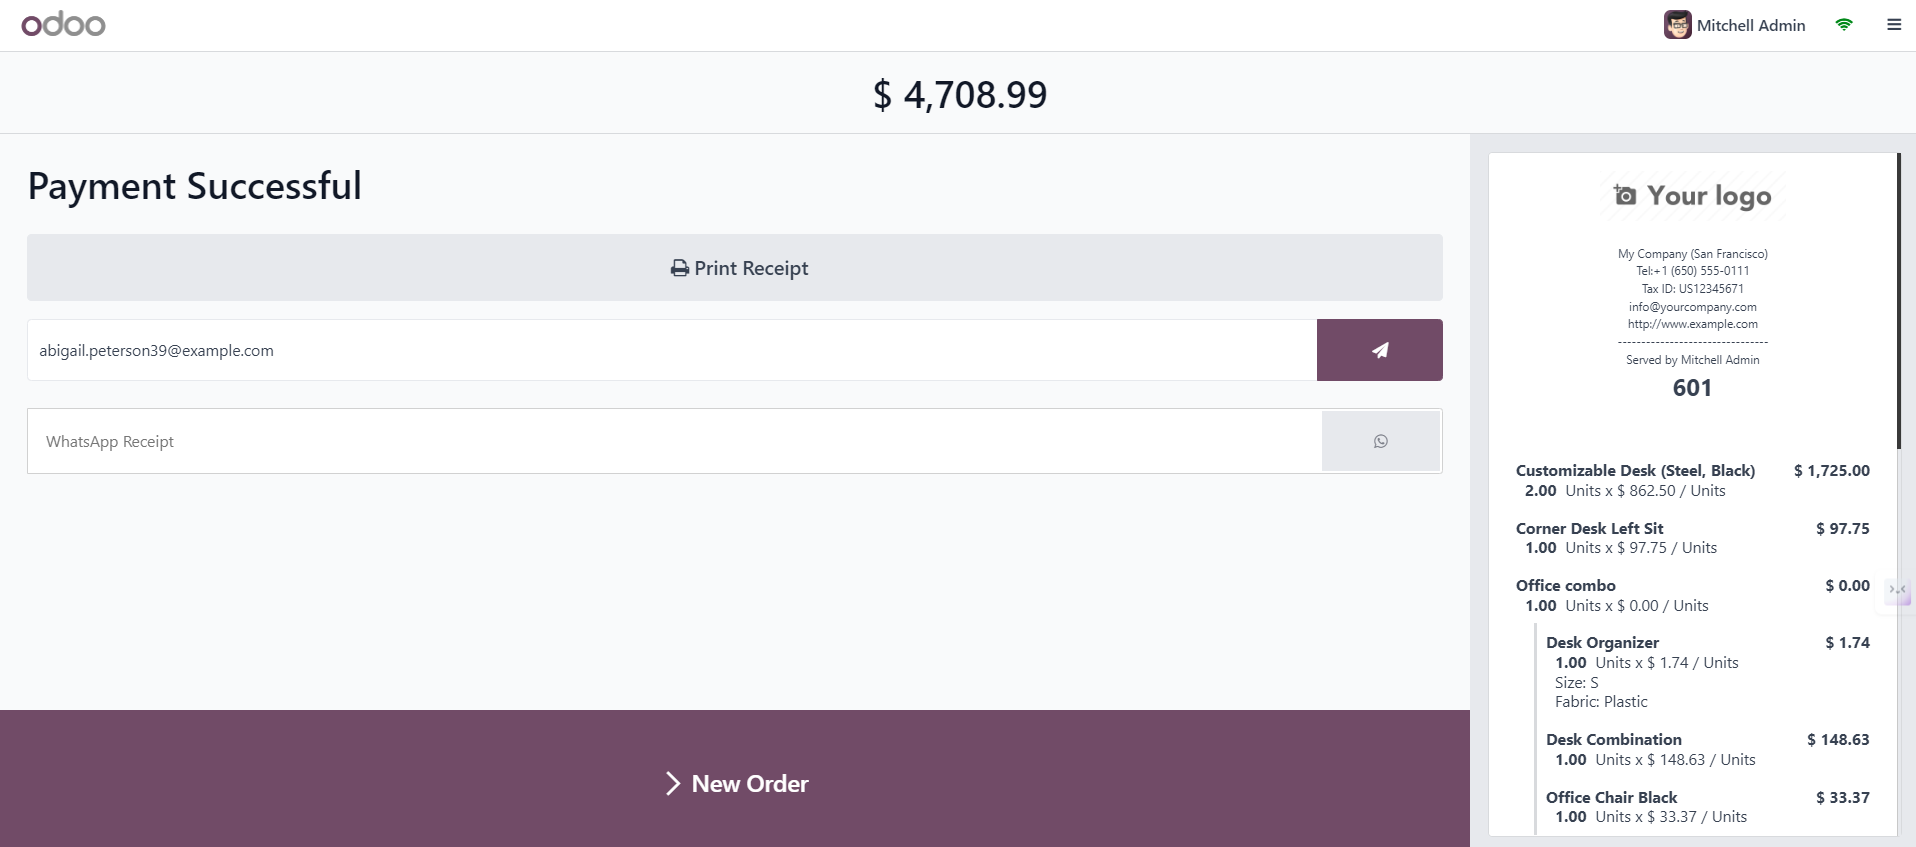 Completing the Sale in Odoo 17 PoS